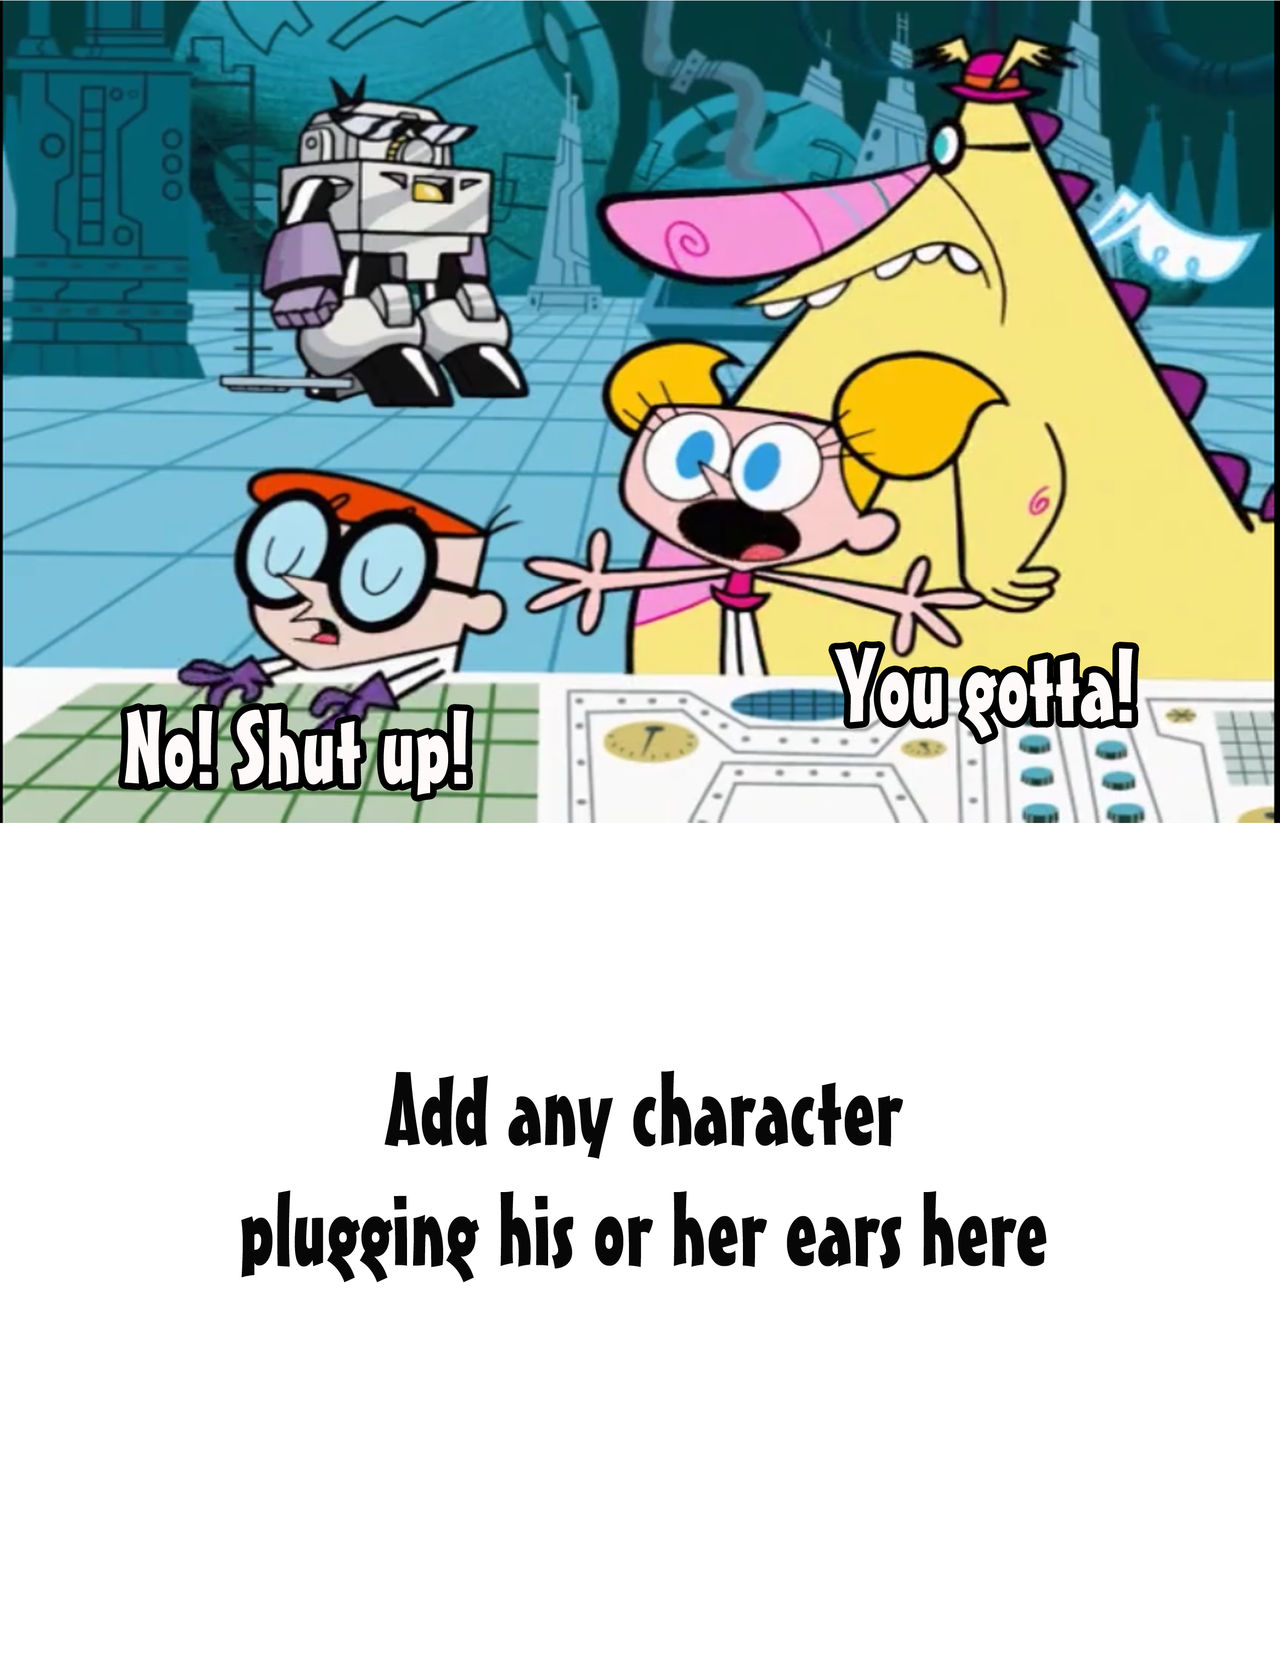 Dexter and Dee Dee's arguing annoys who Blank Meme Template